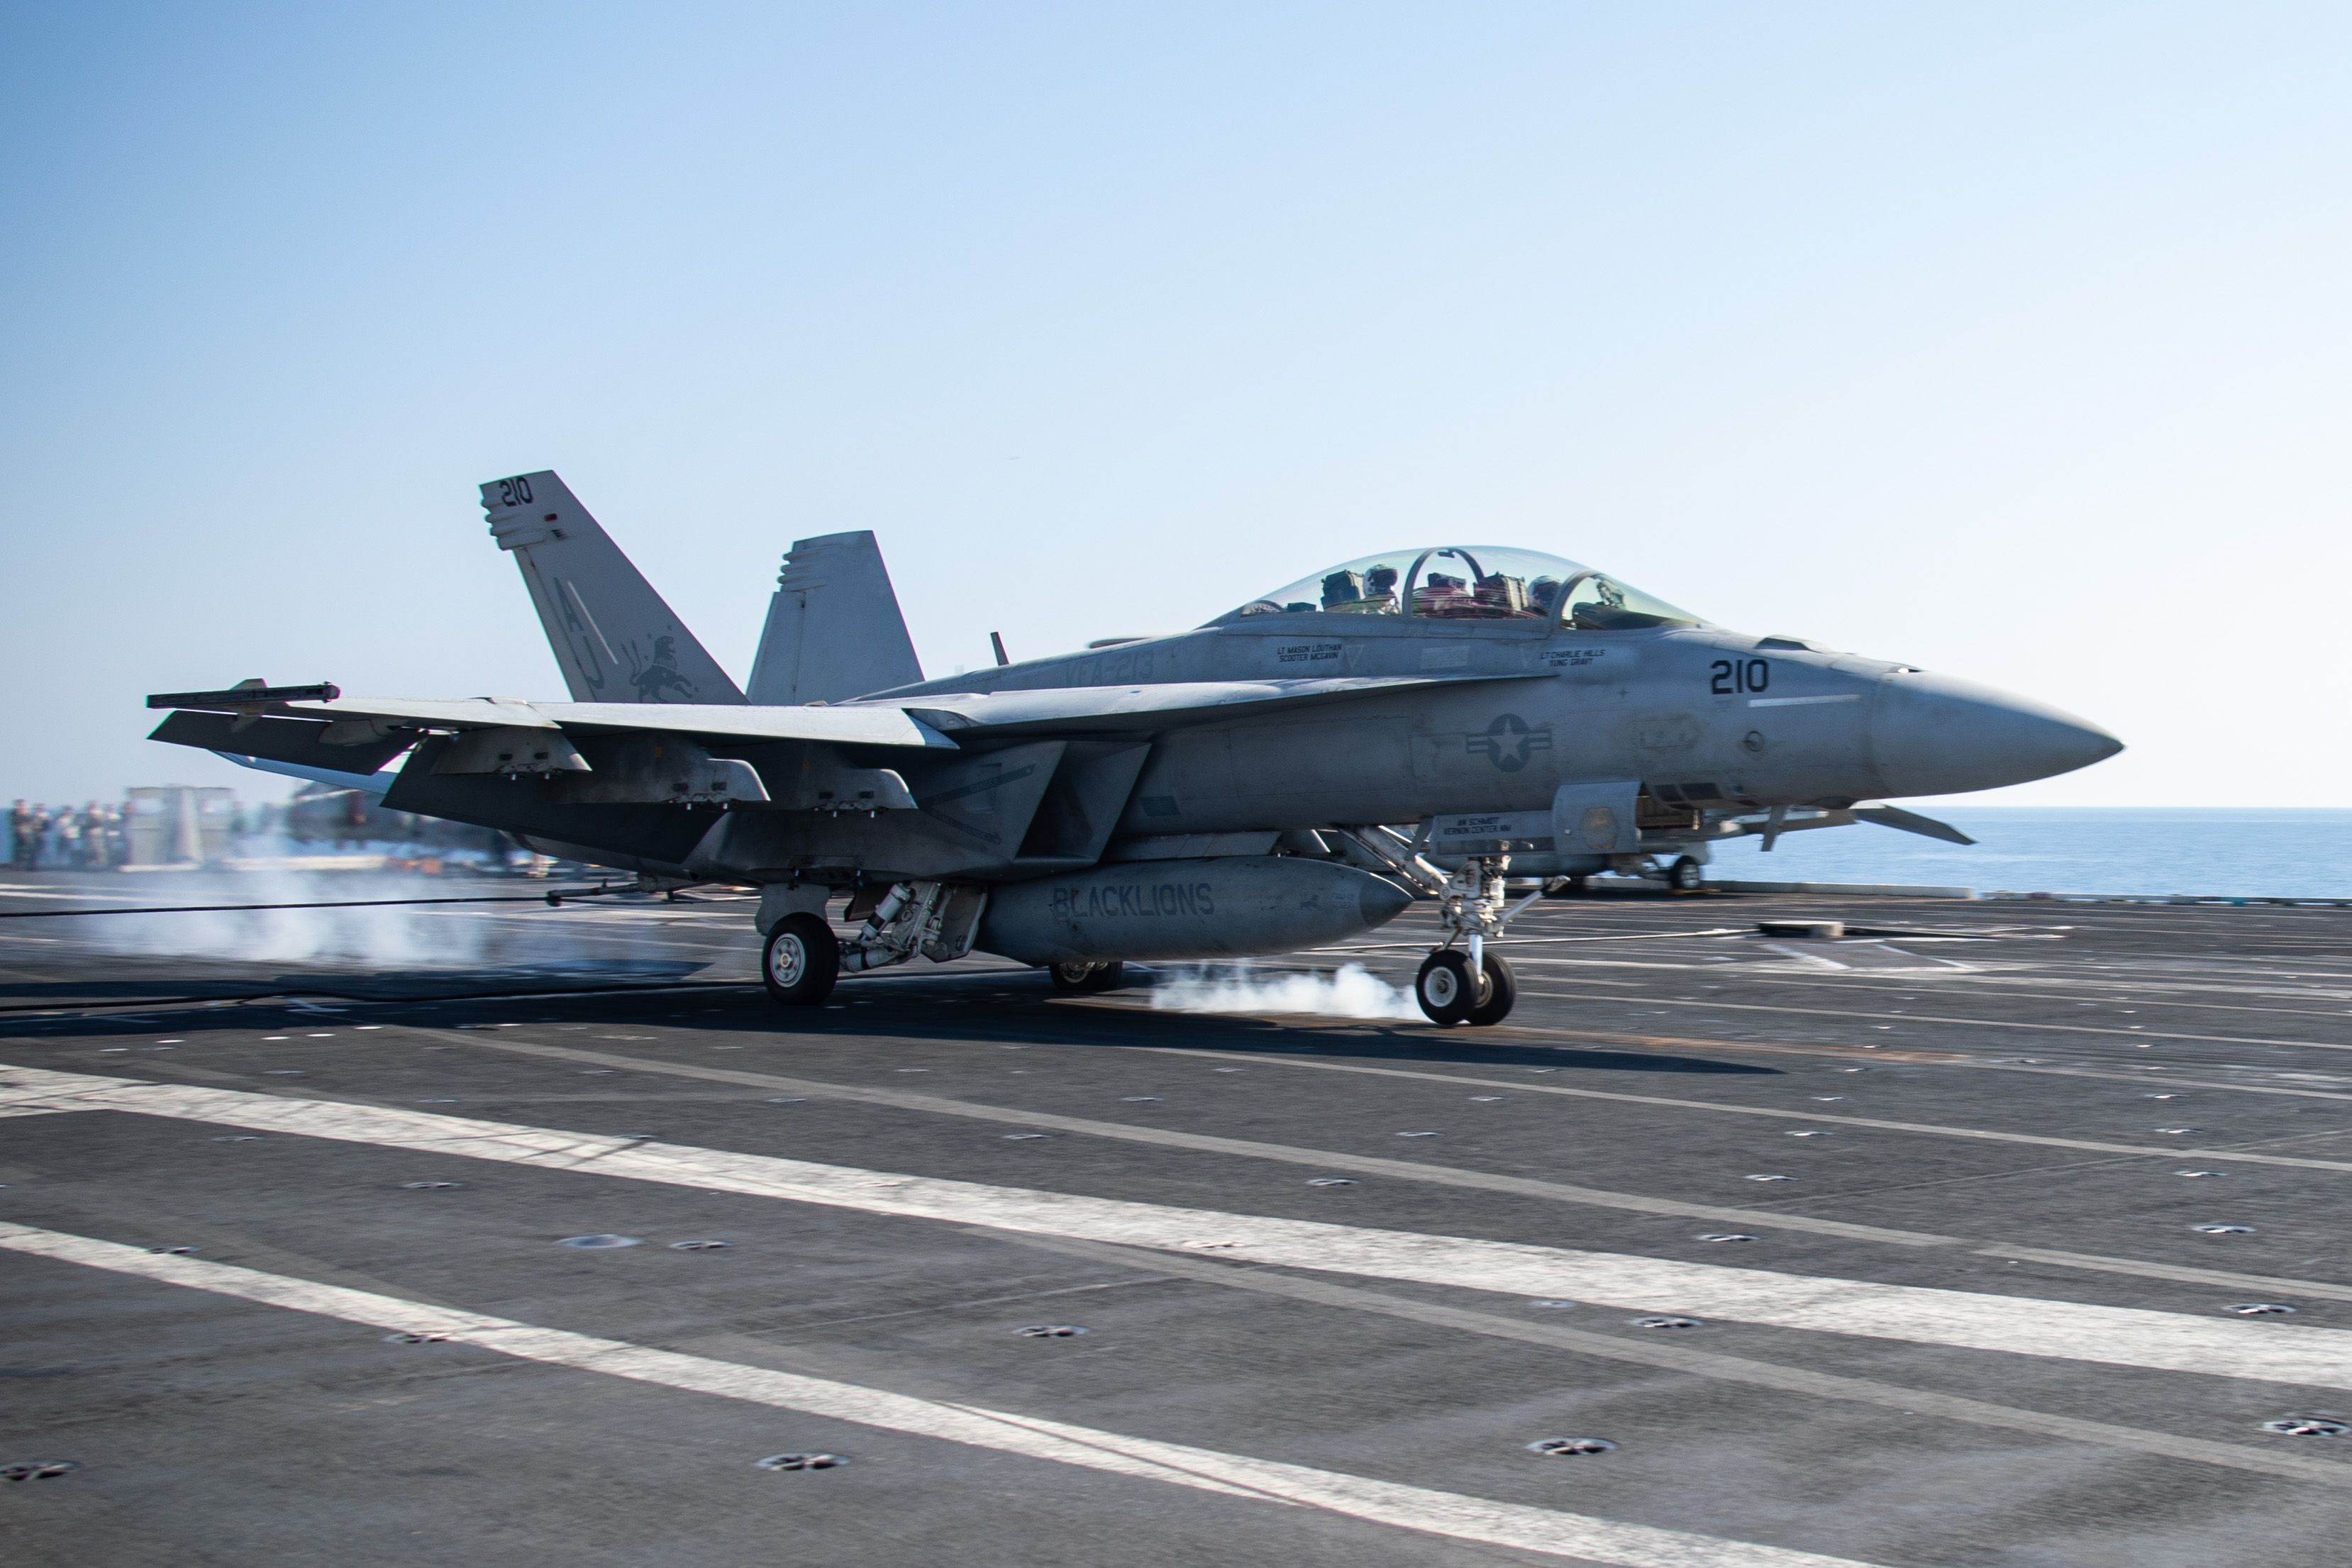 7969027 - Flight Operations [Image 4 of 8] - An F/A-18F Super Hornet, attached to the “Blacklions” of Strike Fighter Squadron (VFA) 213, lands on the flight deck of the world’s largest aircraft carrier USS Gerald R. Ford (CVN 78), Aug. 12, 2023.